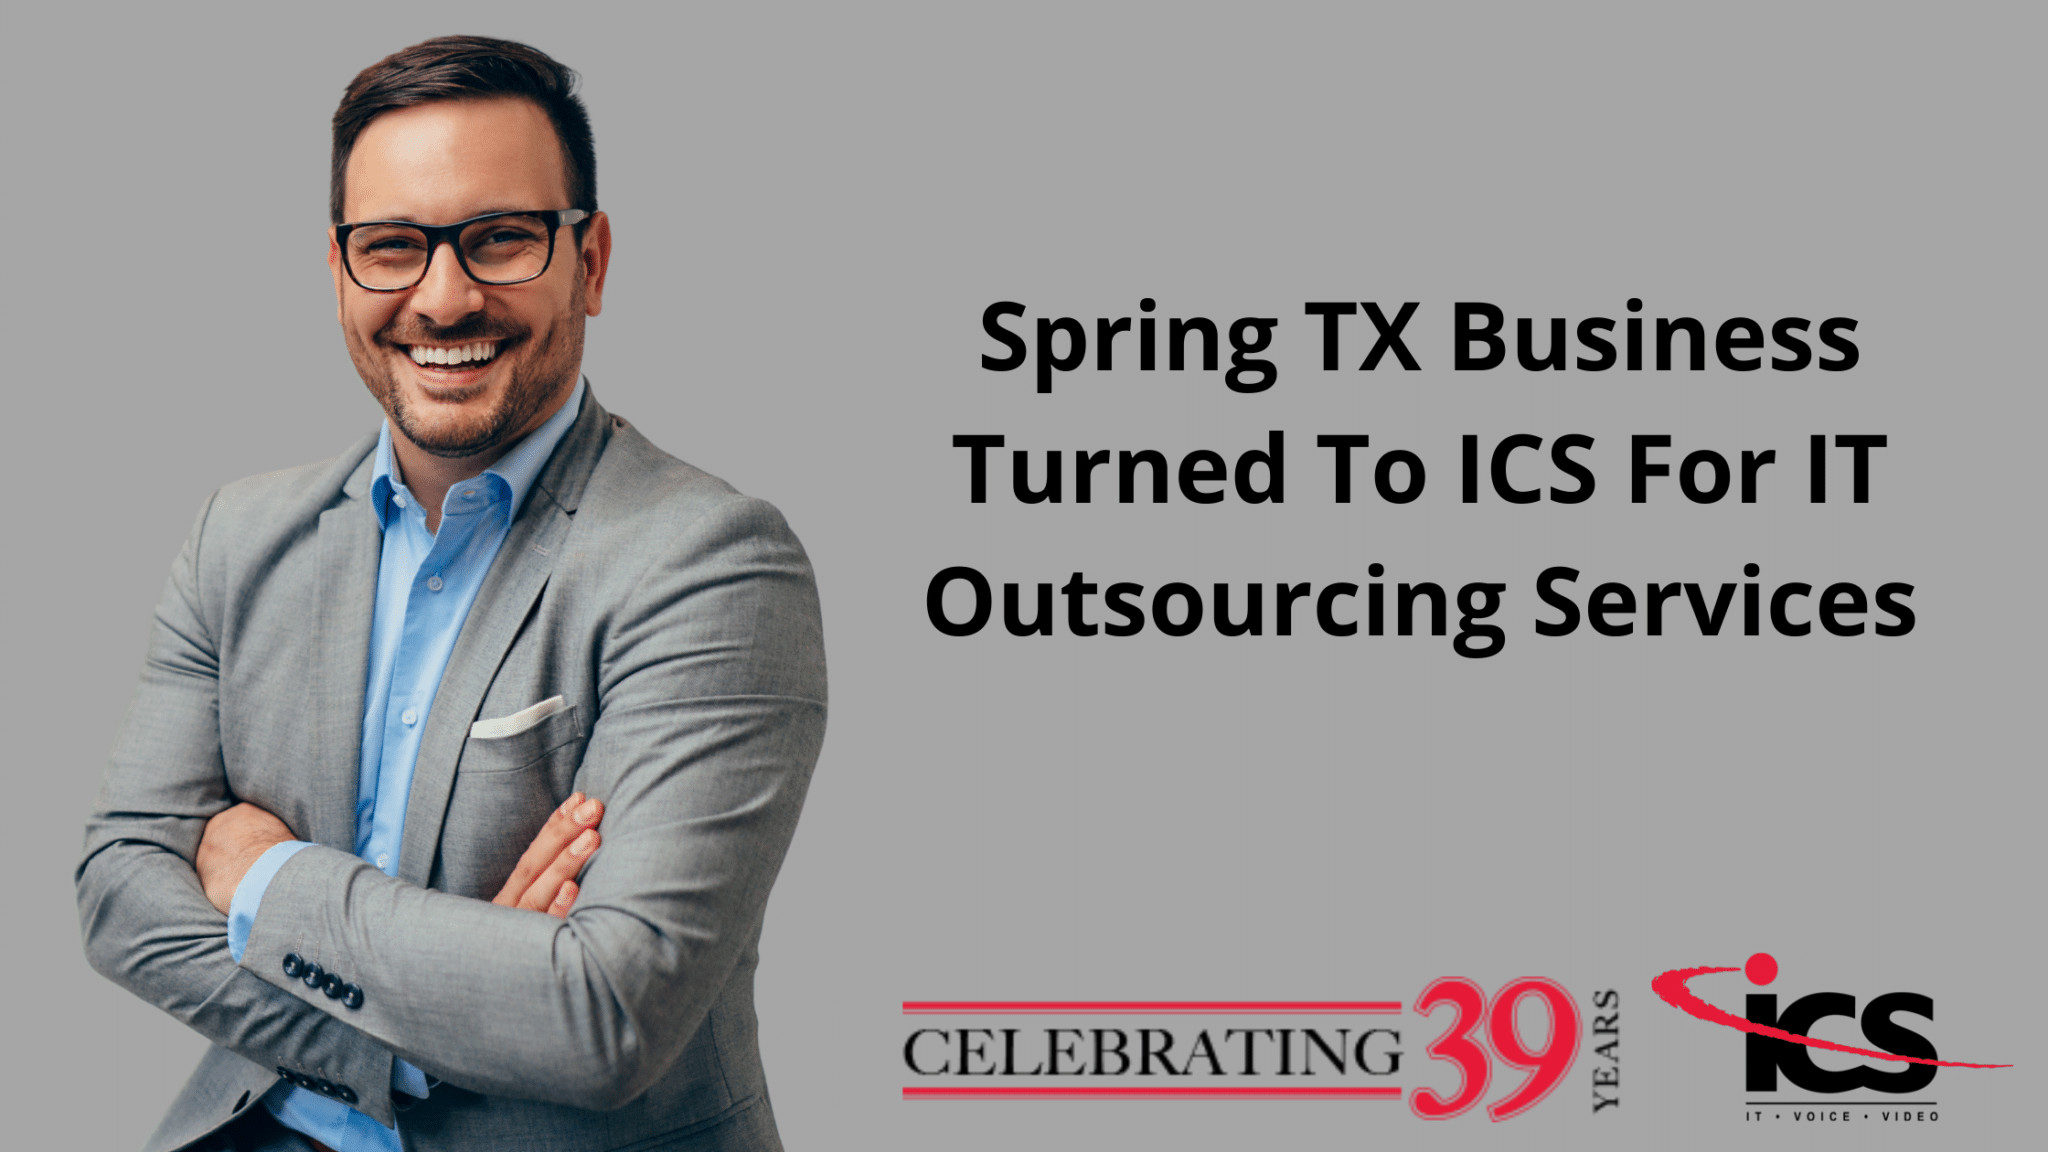 Spring TX Business Turned To ICS For IT Outsourcing Services